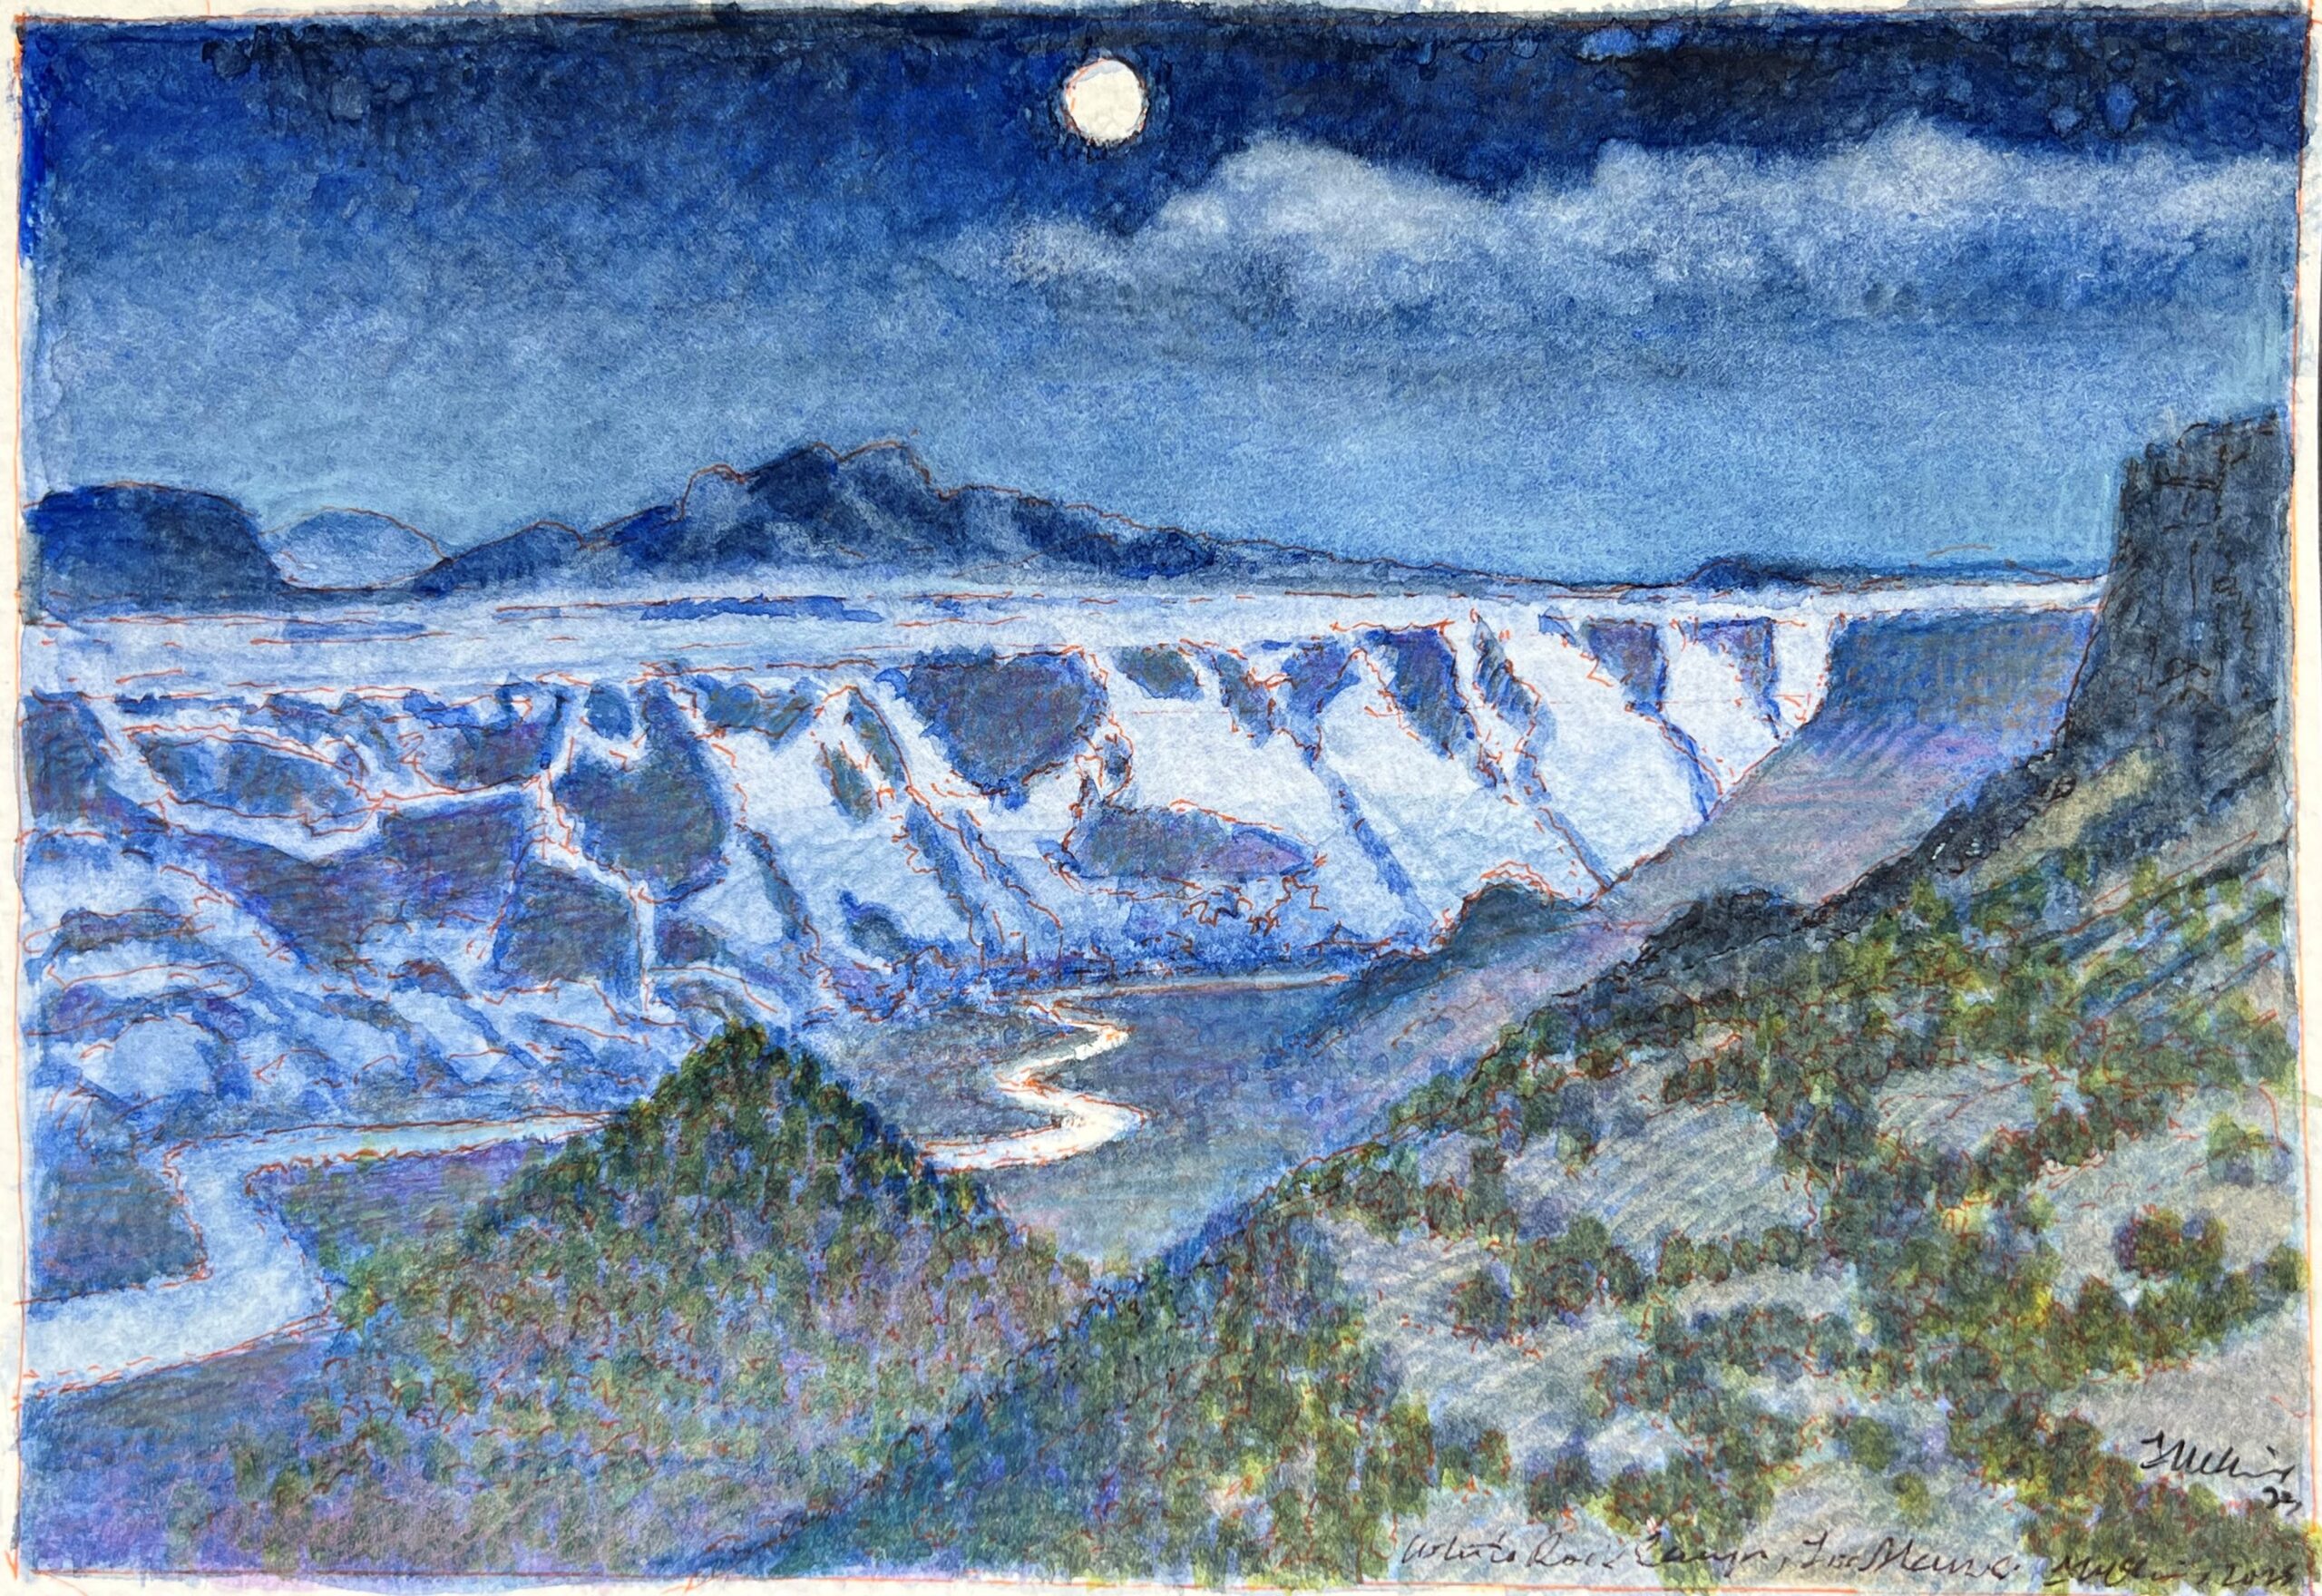 James McElhinney, Moonrise Whiterock Canyon, watercolor and mixed media, 5.5 x 7.25 inches